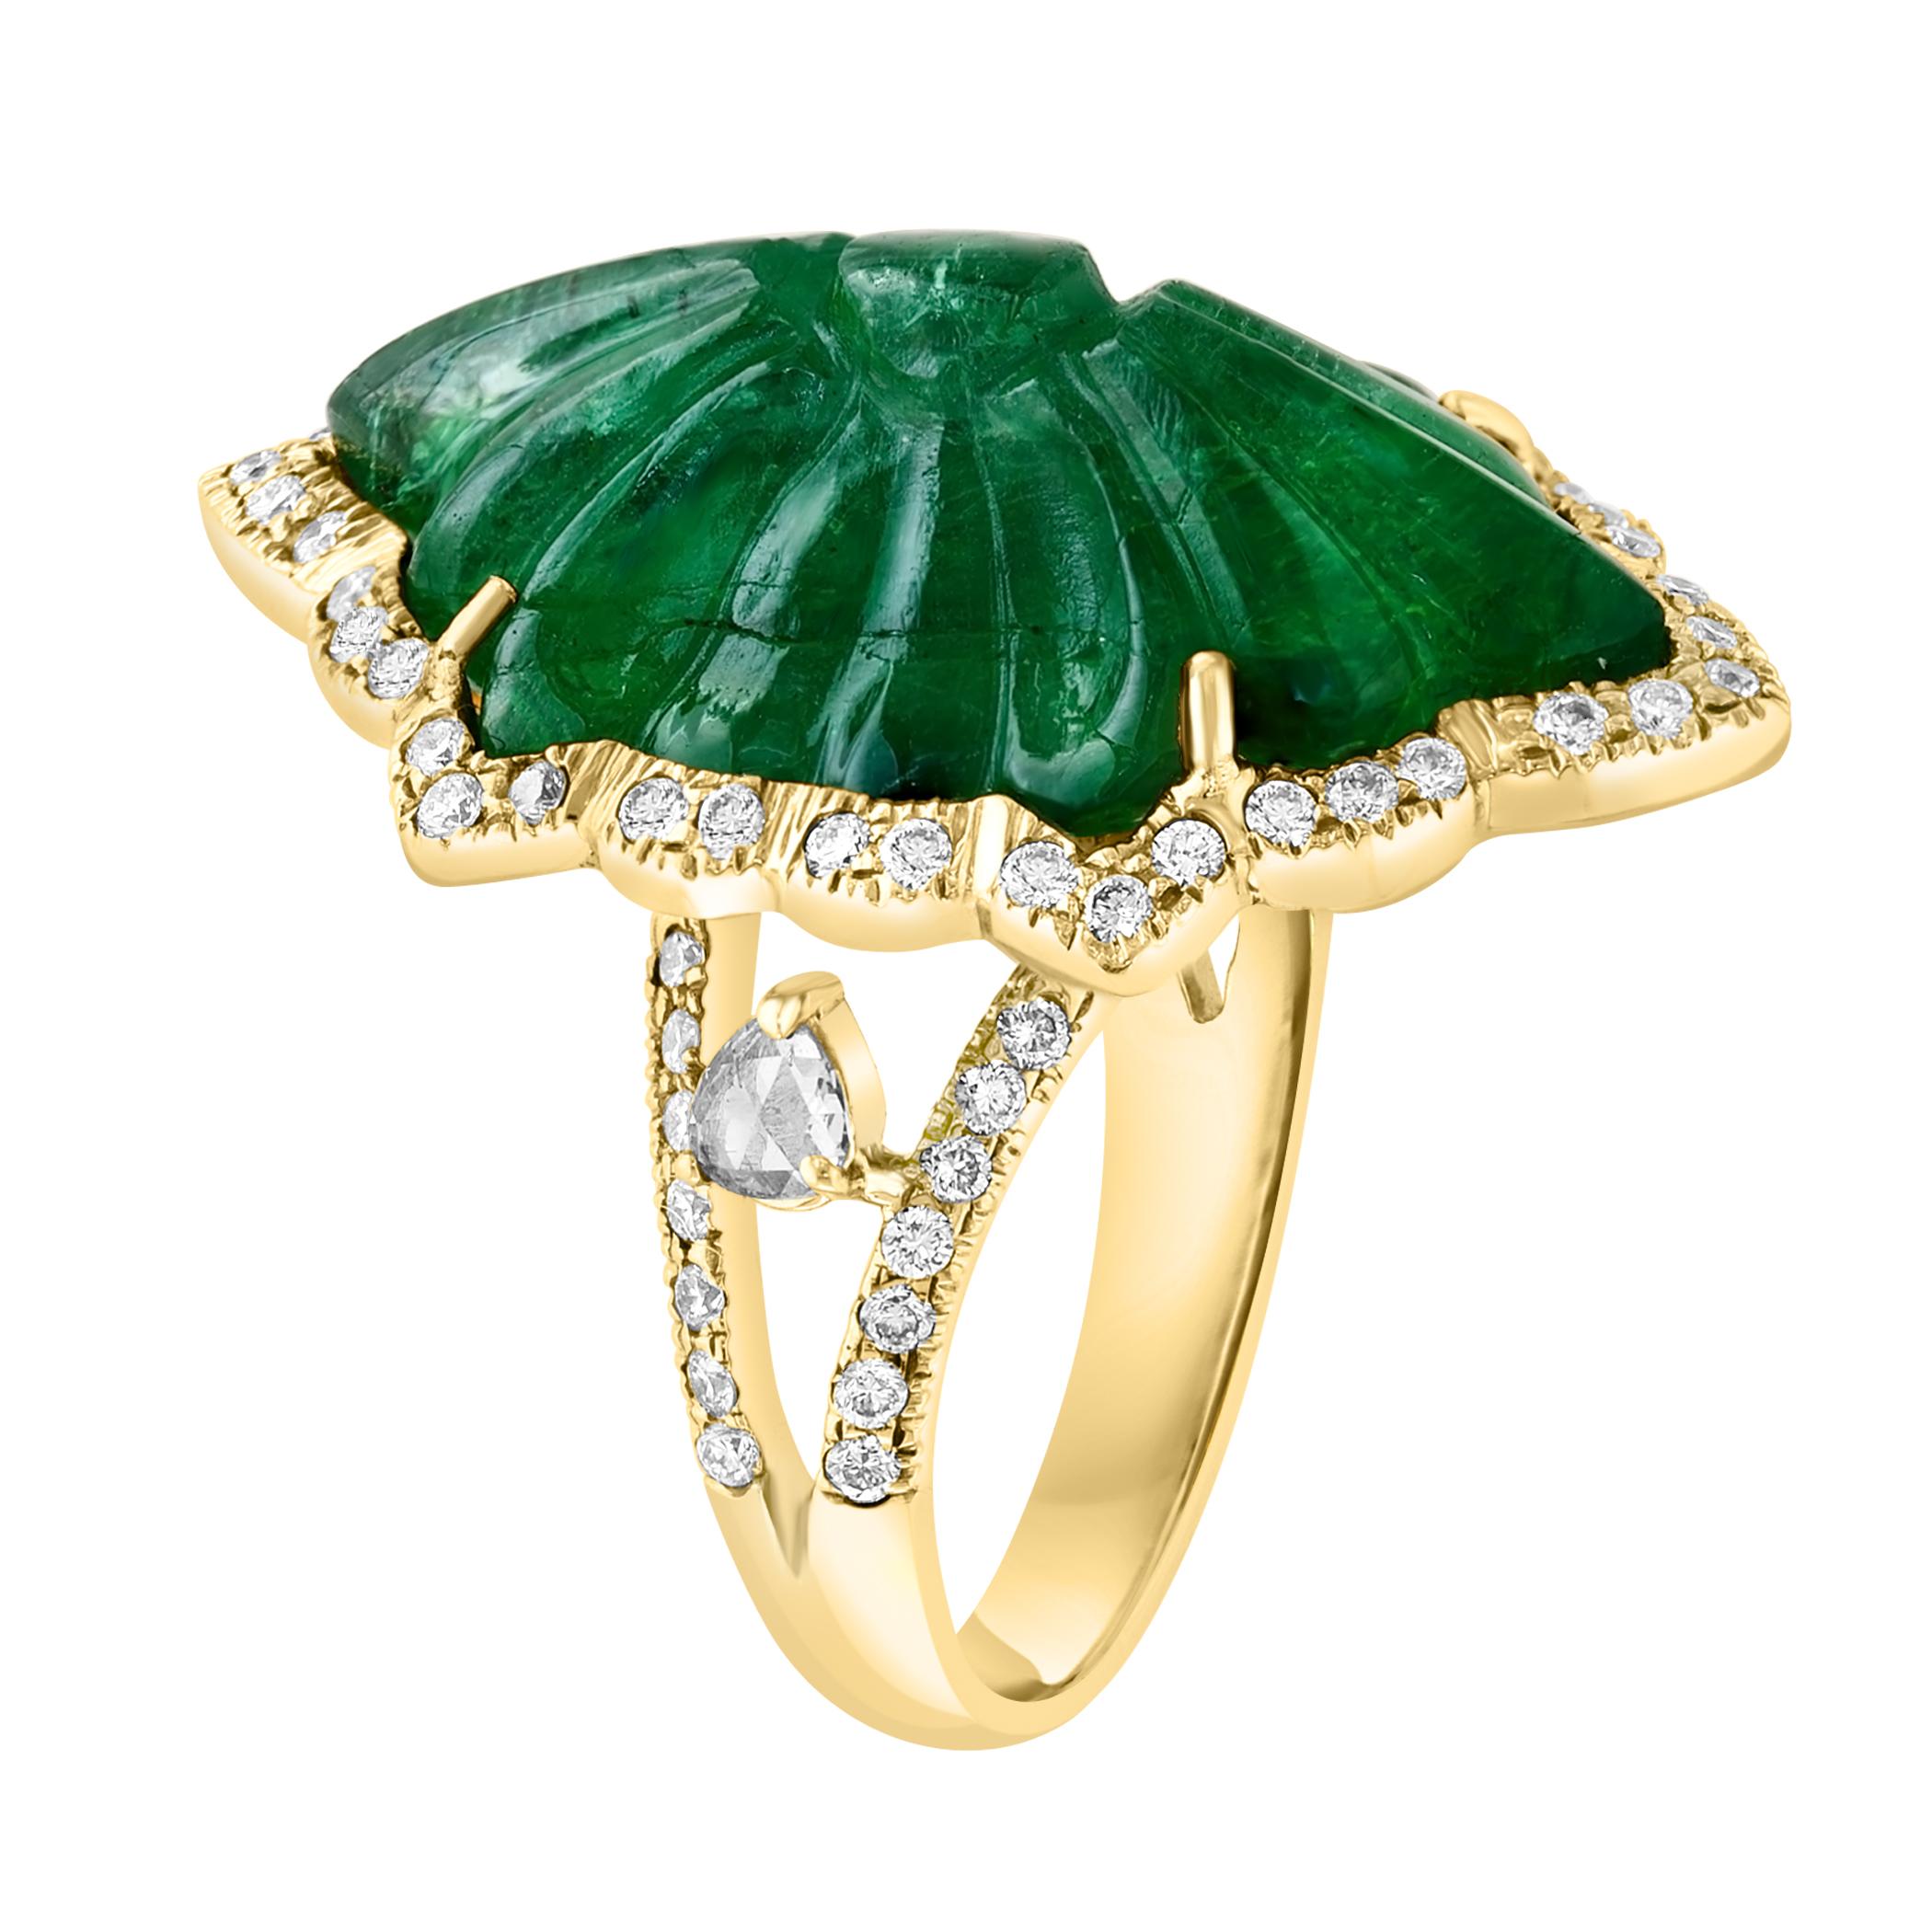 Vintage 18 Karat Yellow Gold Ring Size 6.5 featuring a single solitaire natural carved emerald approximately 12 ct with beautiful color and clarity. Accompanied by brilliant cut diamonds approximately 1.5 ct. The ring weighs 12.1 gm and can be